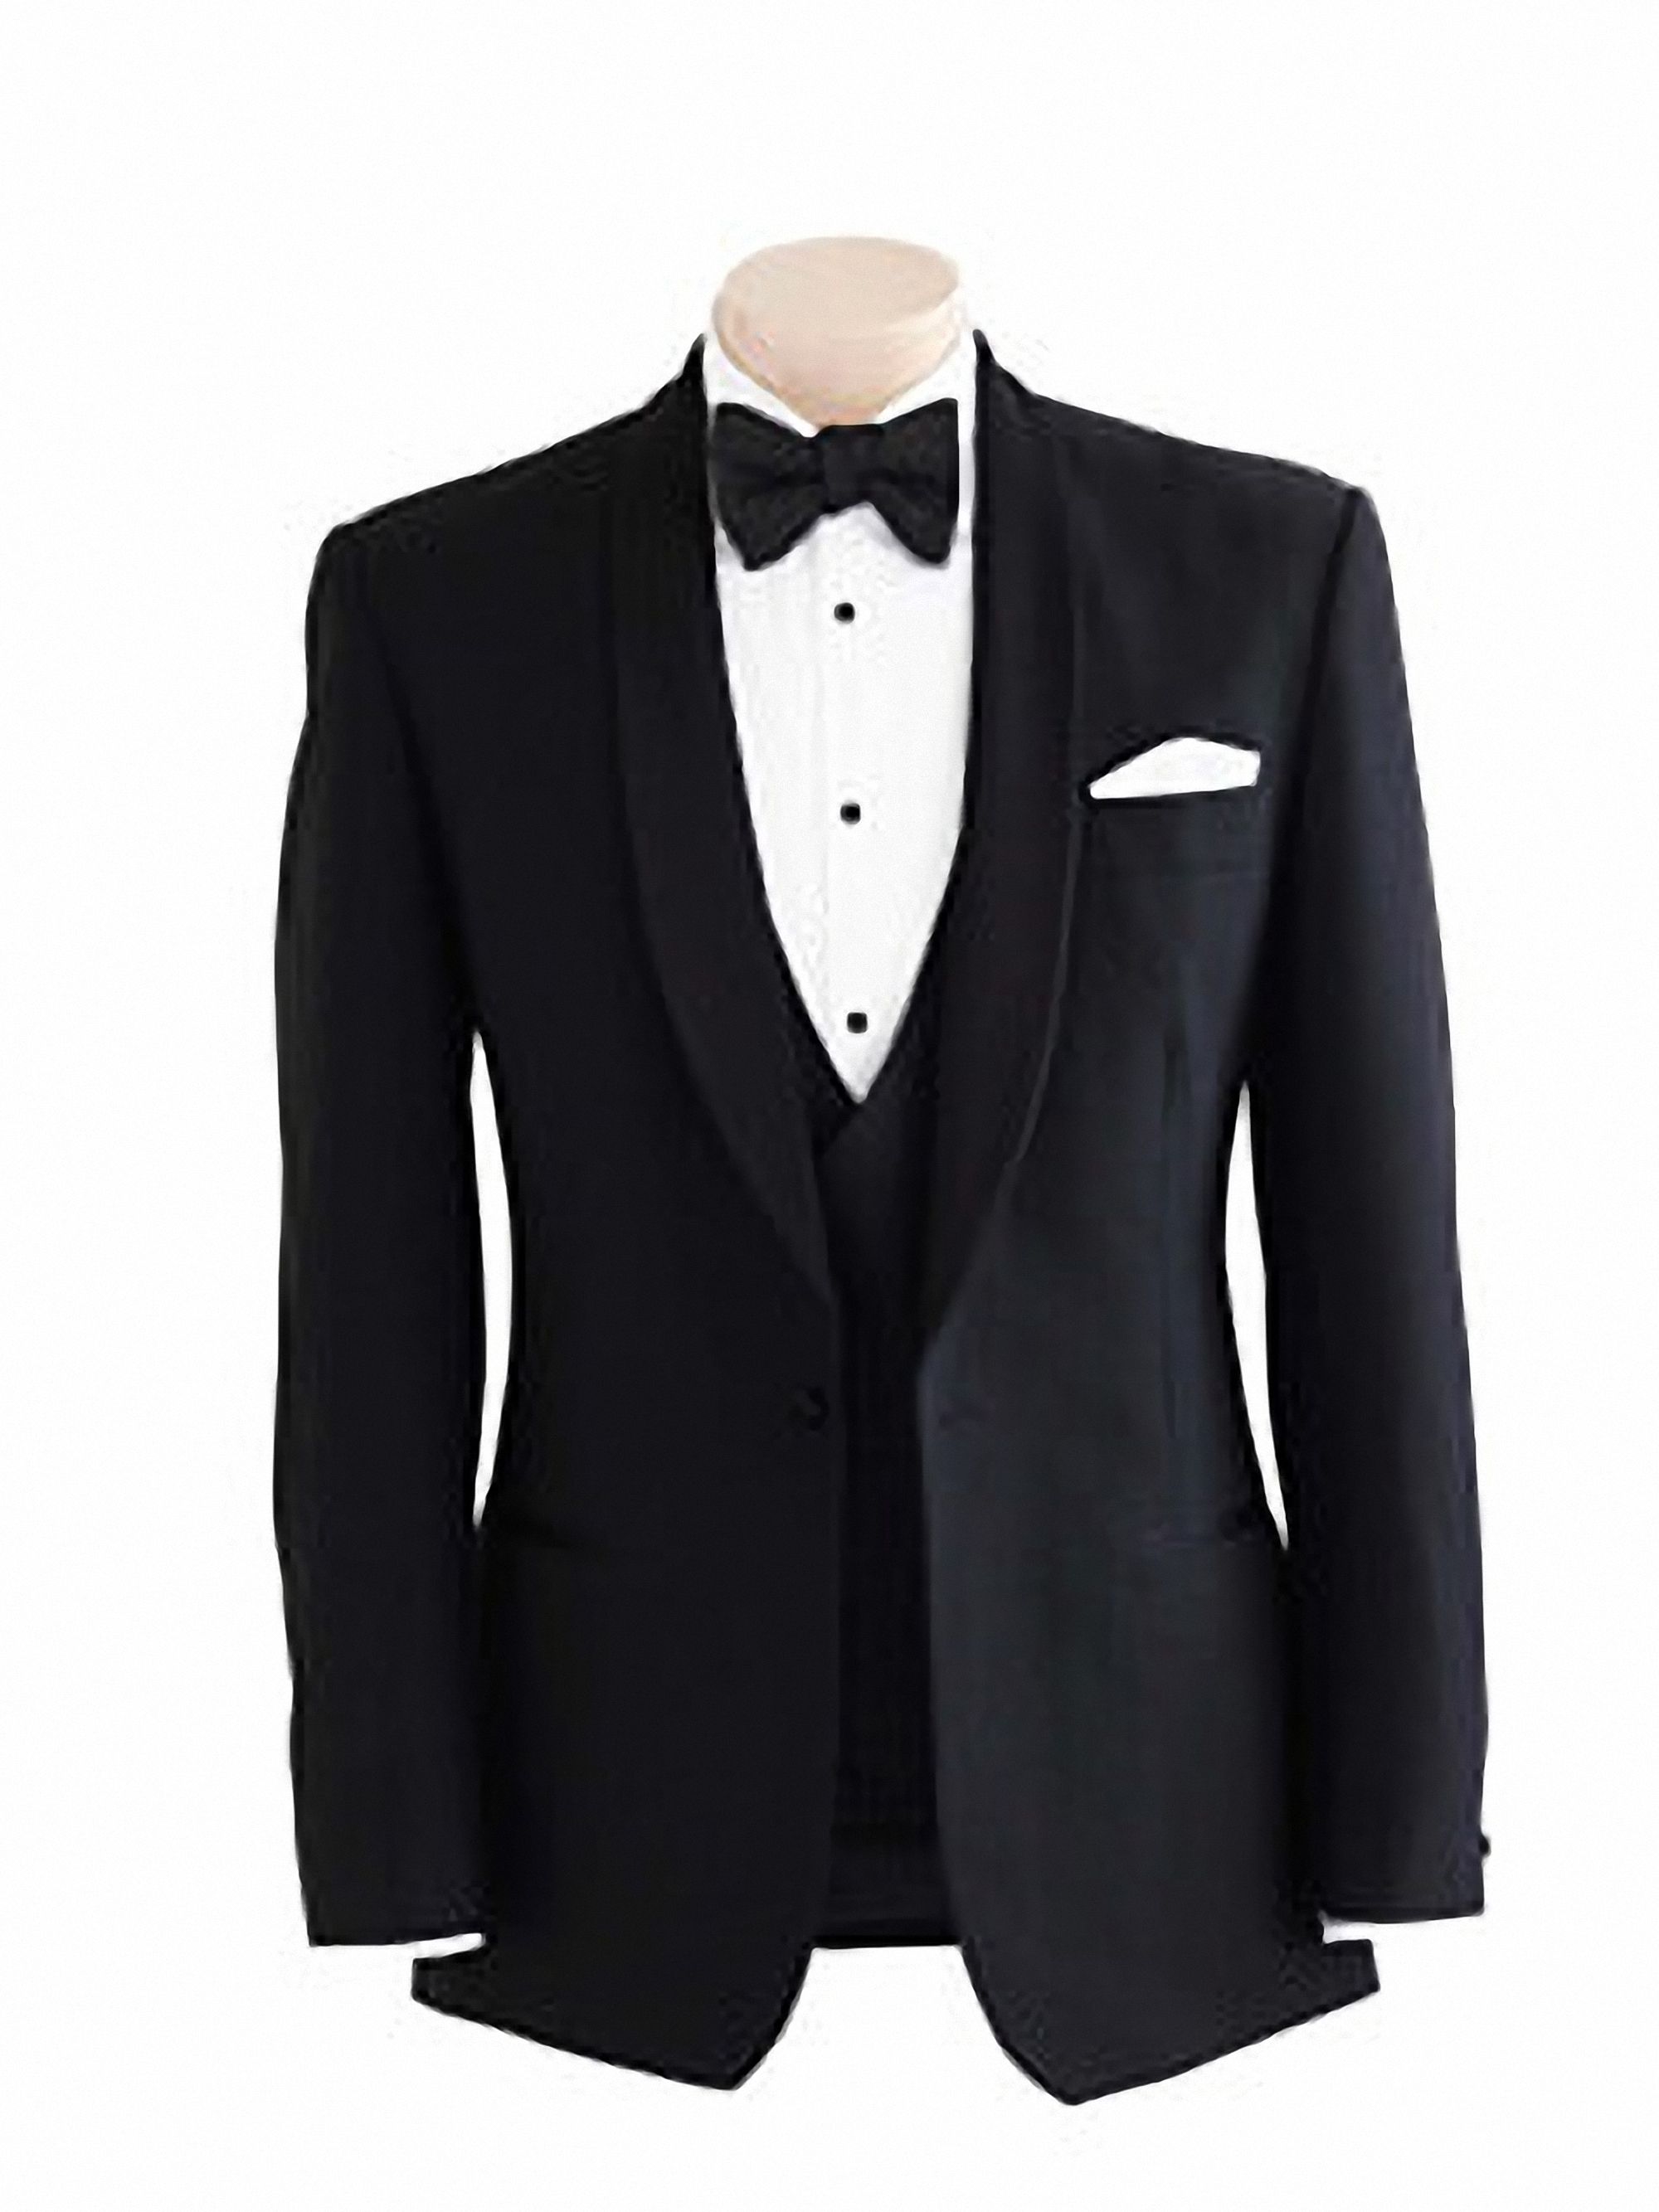 Peppers Formal Wear | Quality Men’s Tailored Suits in Sydney